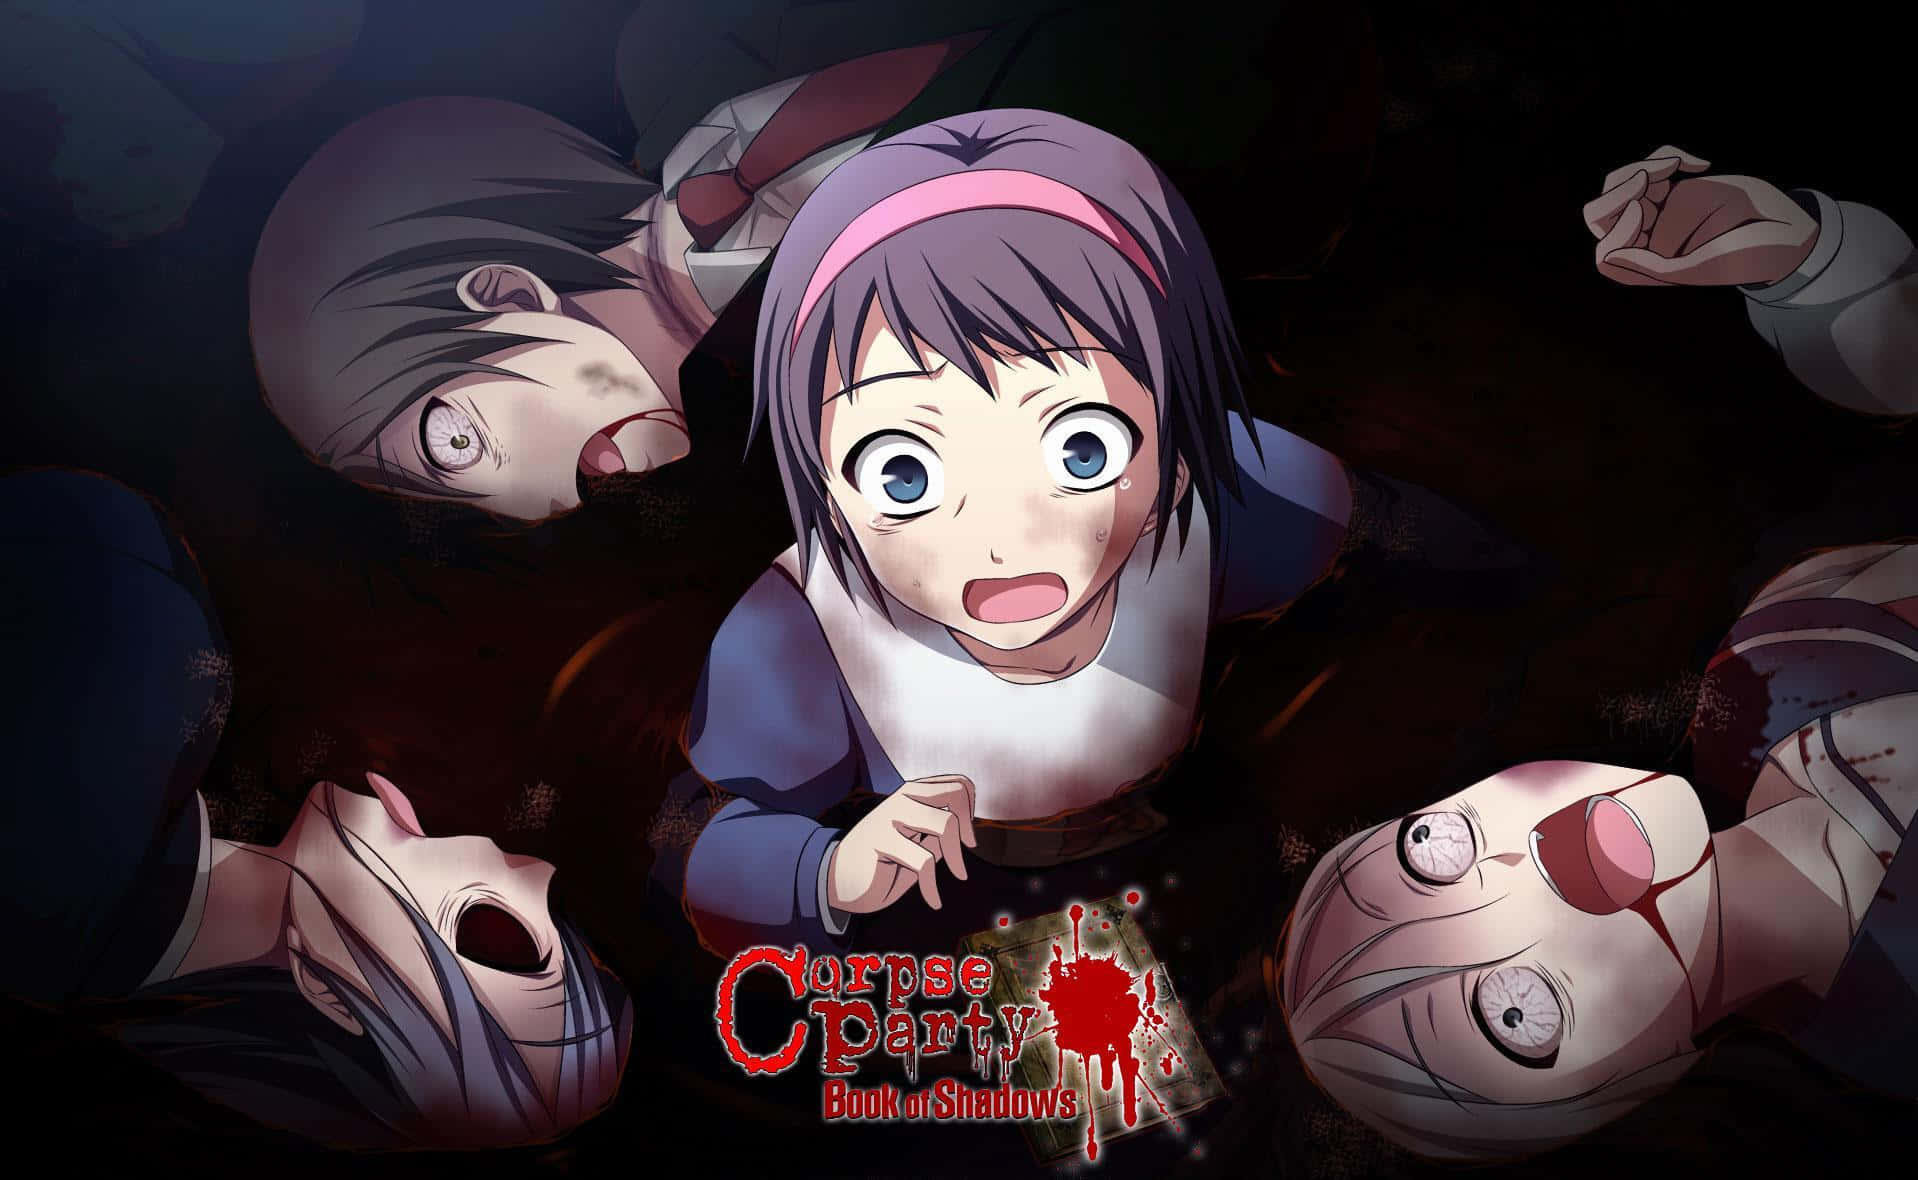 Take a break from reality and dive into the mind-bending world of thriller anime! Wallpaper